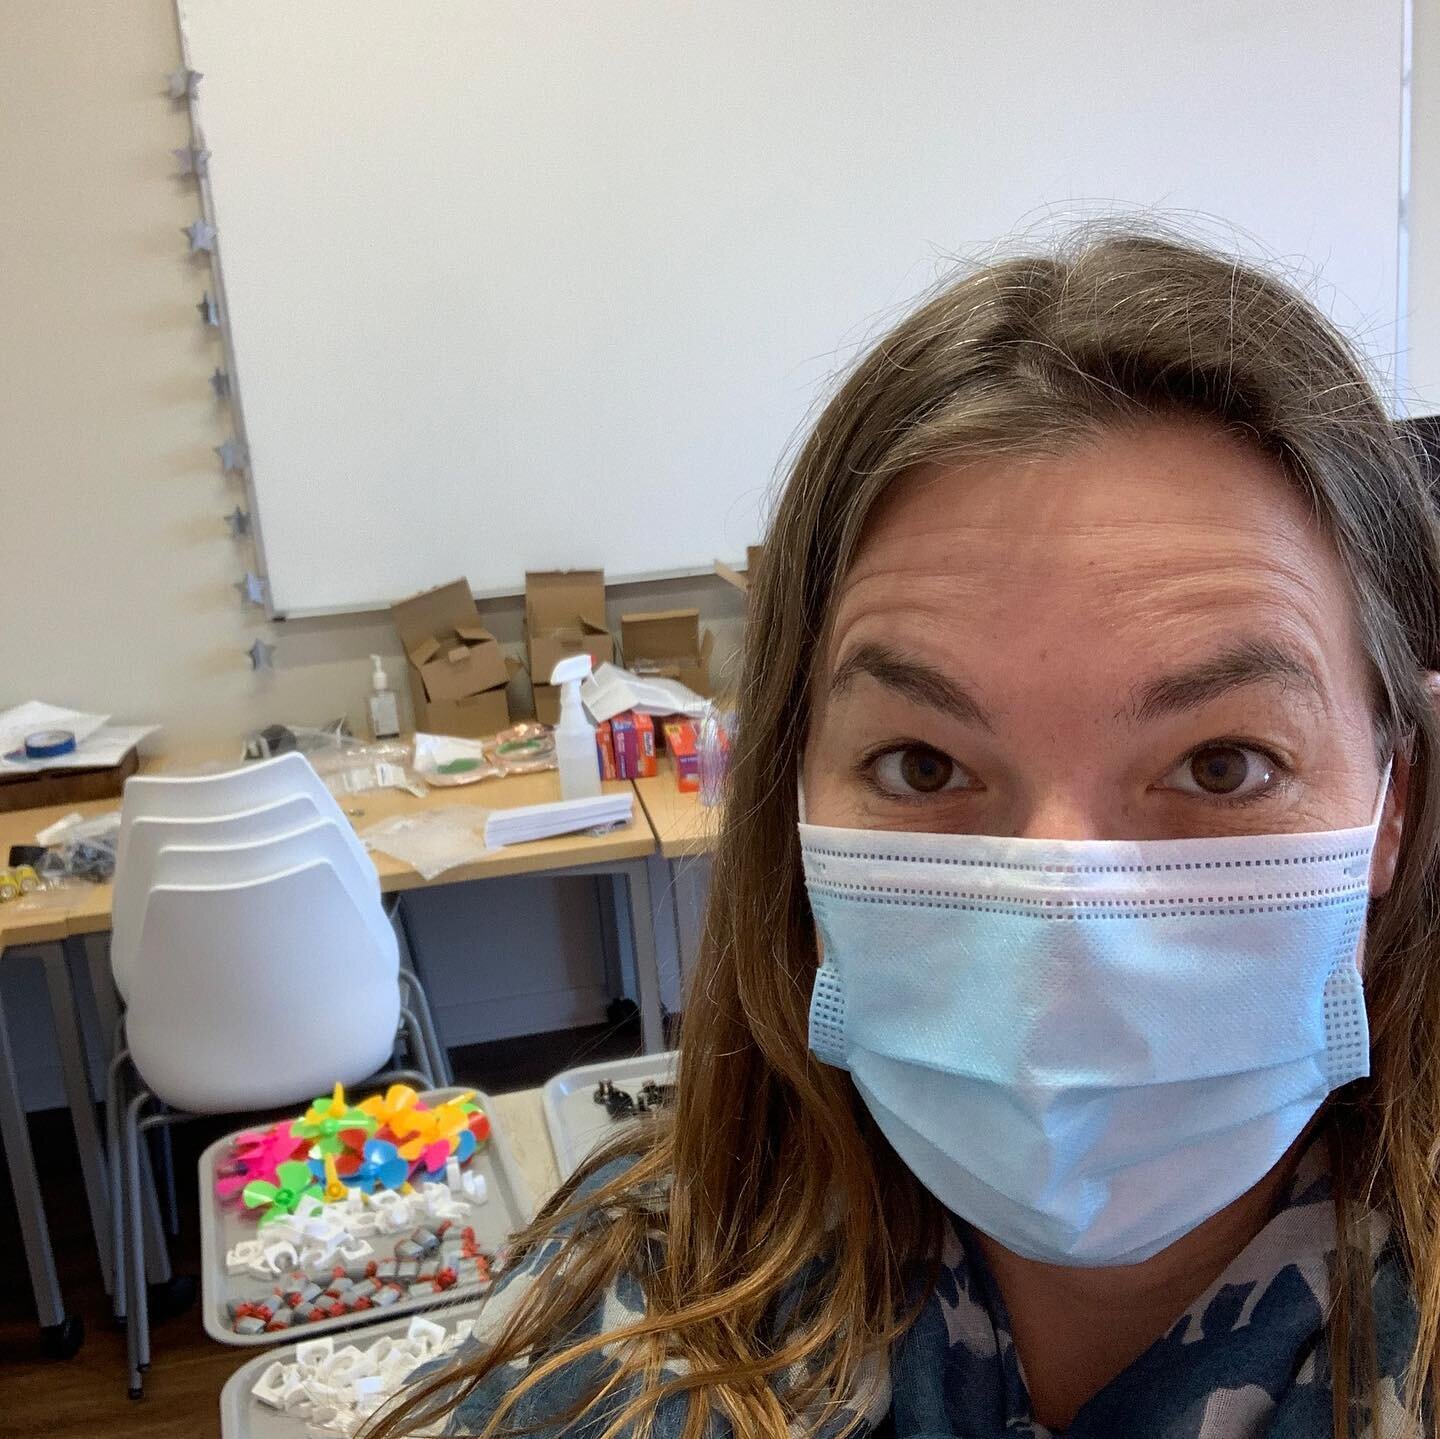 Tomorrow is the first day of #distancelearning at Millennium! What&rsquo;s in store for the new school year, you ask? STEM Guide Lindsay is burning that midnight oil preparing kits and soldering mini solar panels for her quests! 💫 #millenniumschool 